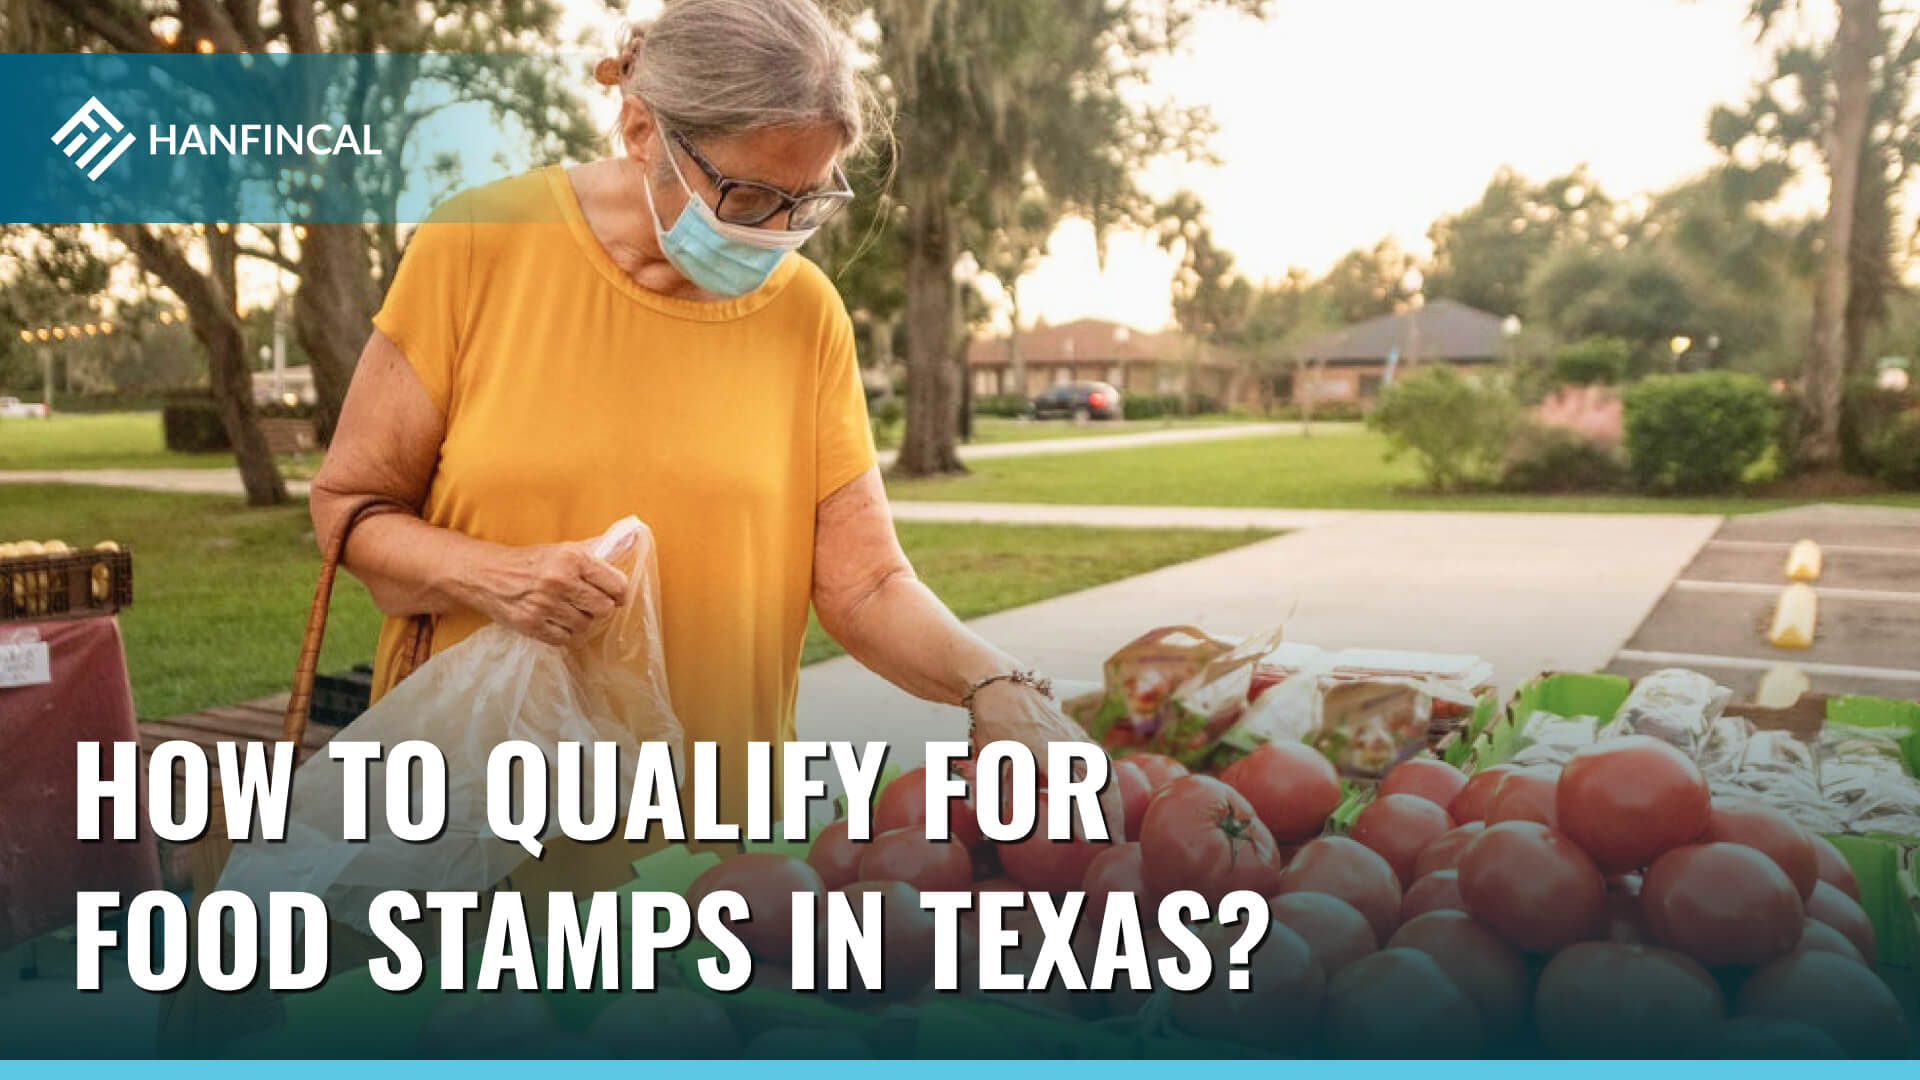 How to qualify for Food Stamps in Texas?